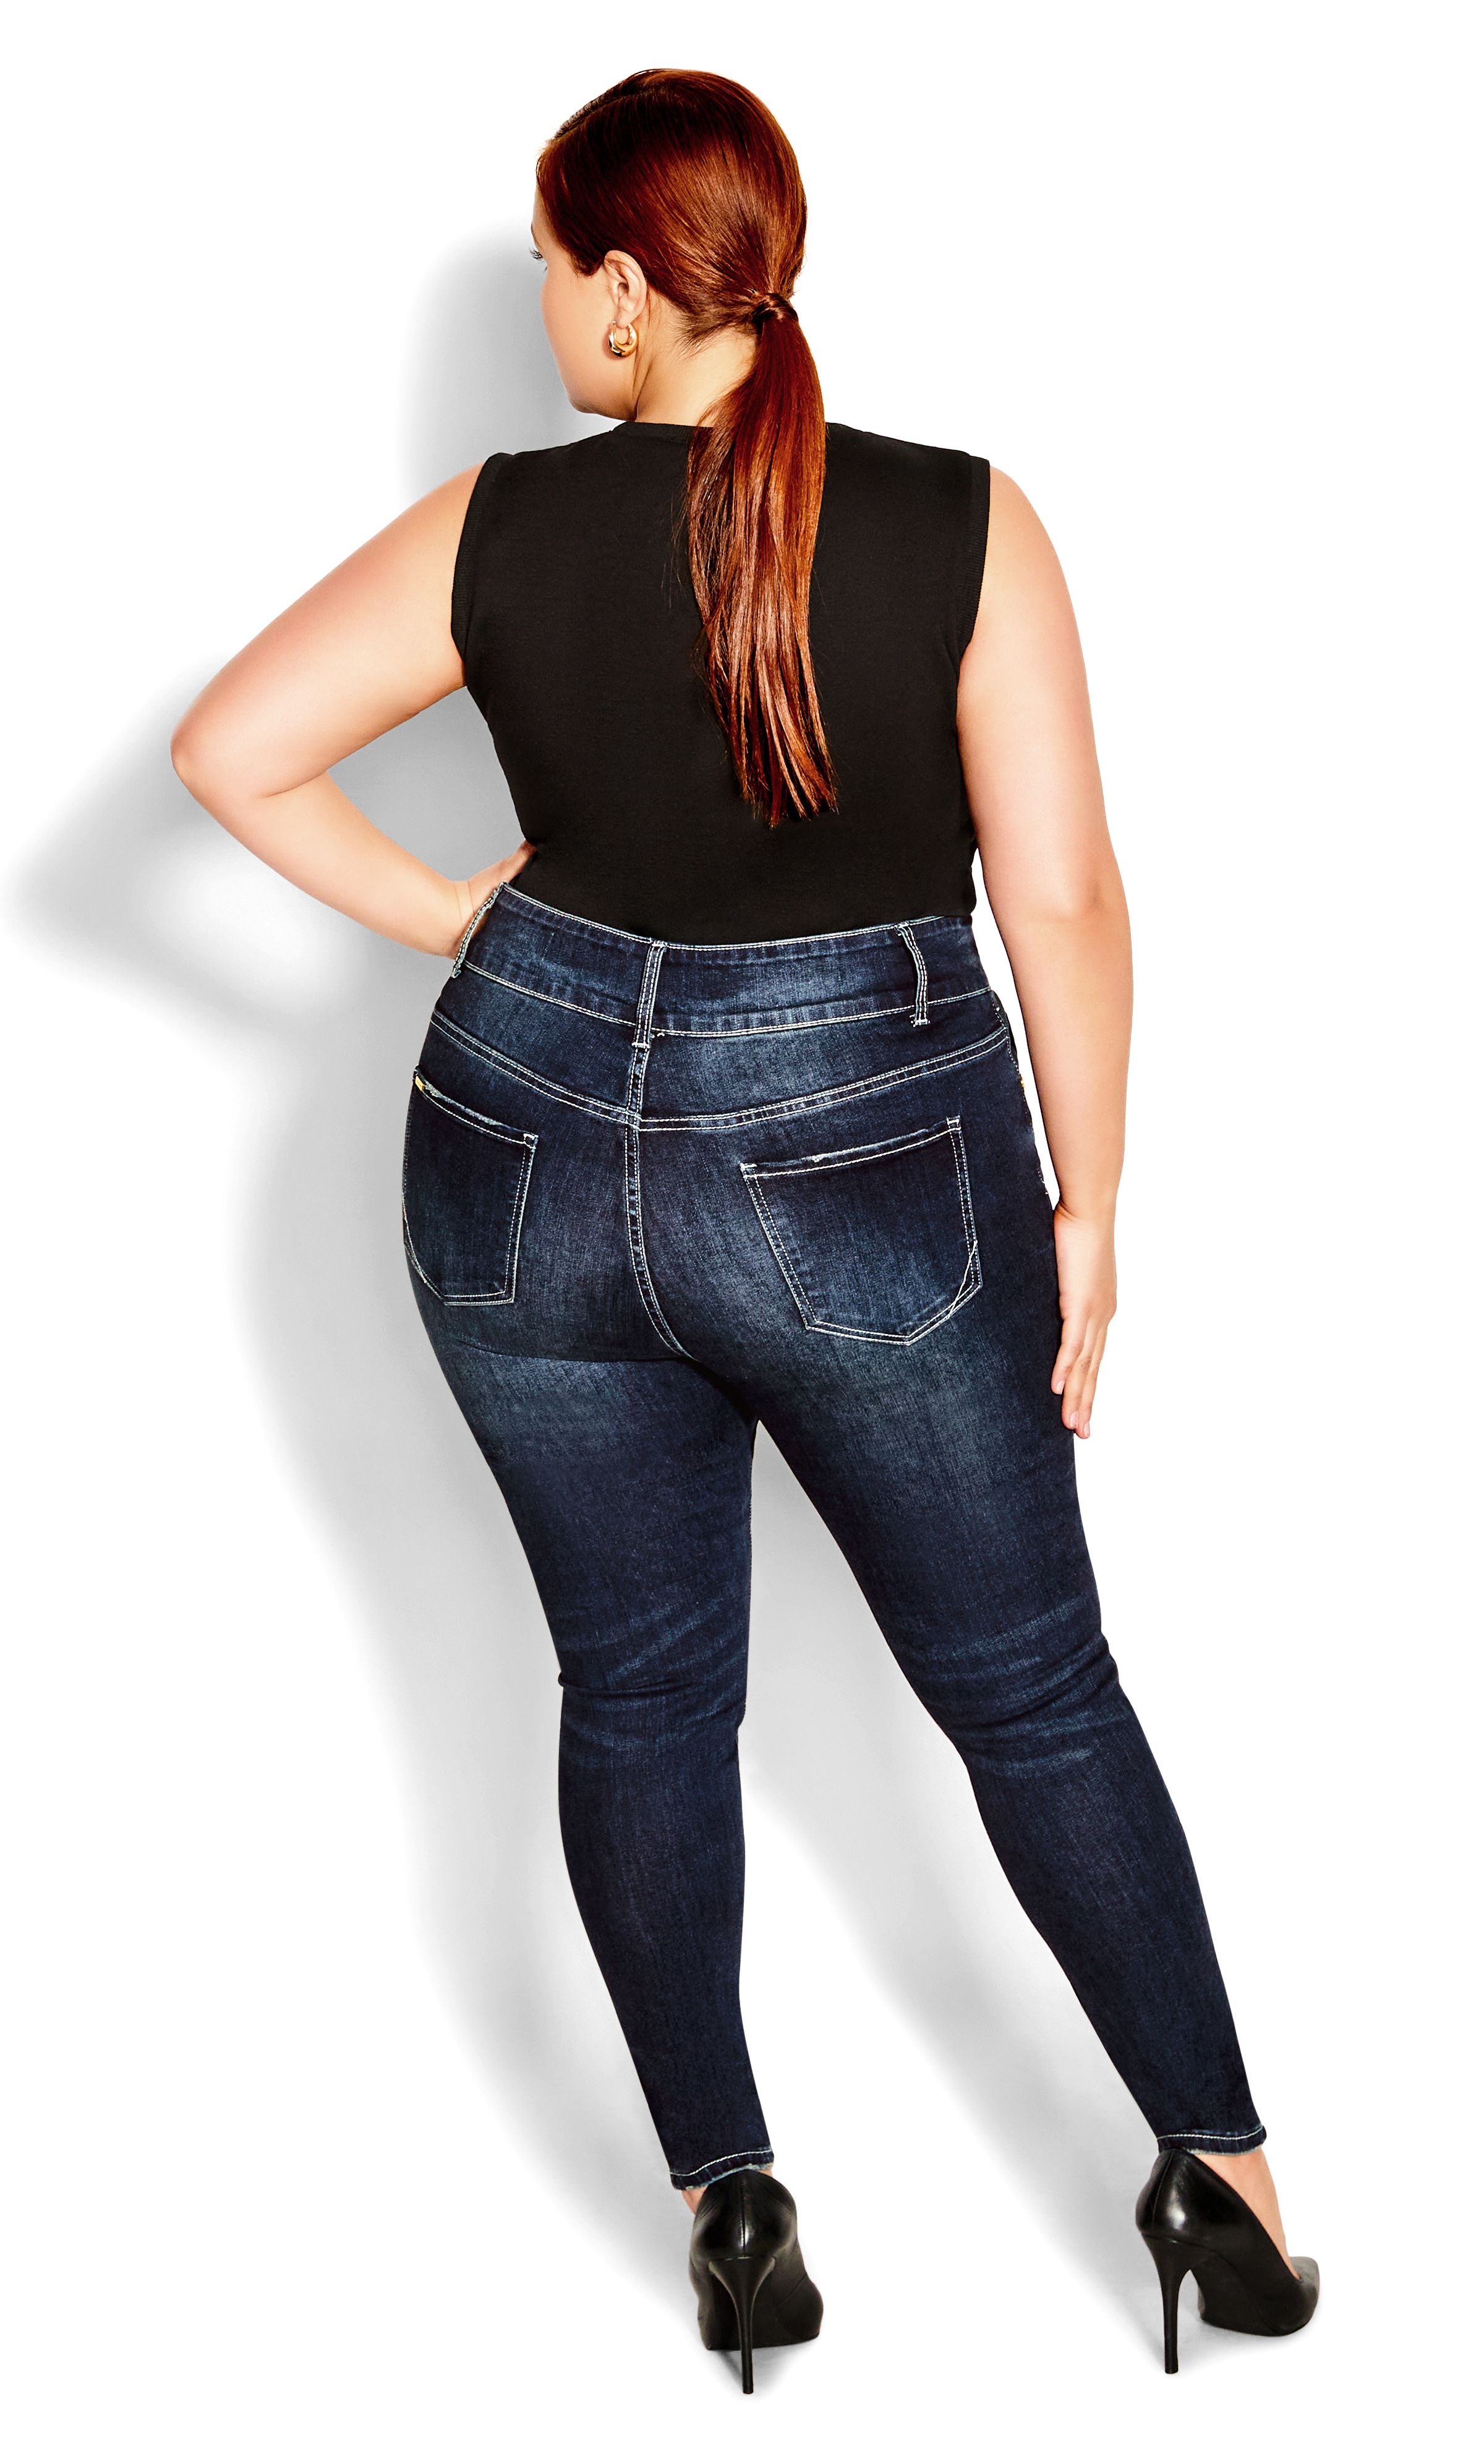 Add a chic touch to your casual outfit with the ripped stylings of our Asha Sassy Rips Jean. Flaunting a stretch denim construction and the perfect fit for an apple body shape, these jeans are a savvy style for your next day out with the girls! Key Features Include: - Asha: the perfect fit for an apple body shape - High rise - Double button & zip fly closure - Belt-looped waistline - 5-pocket denim styling - Stretch cotton blend fabrication - Distressed detail - Skinny leg - High denim fibre retention to maintain shape - Signature Chic Denim hardware throughout zips, buttons and rivets - Full length Glam it up with a wrap top and polished pumps for a smart casual finish.